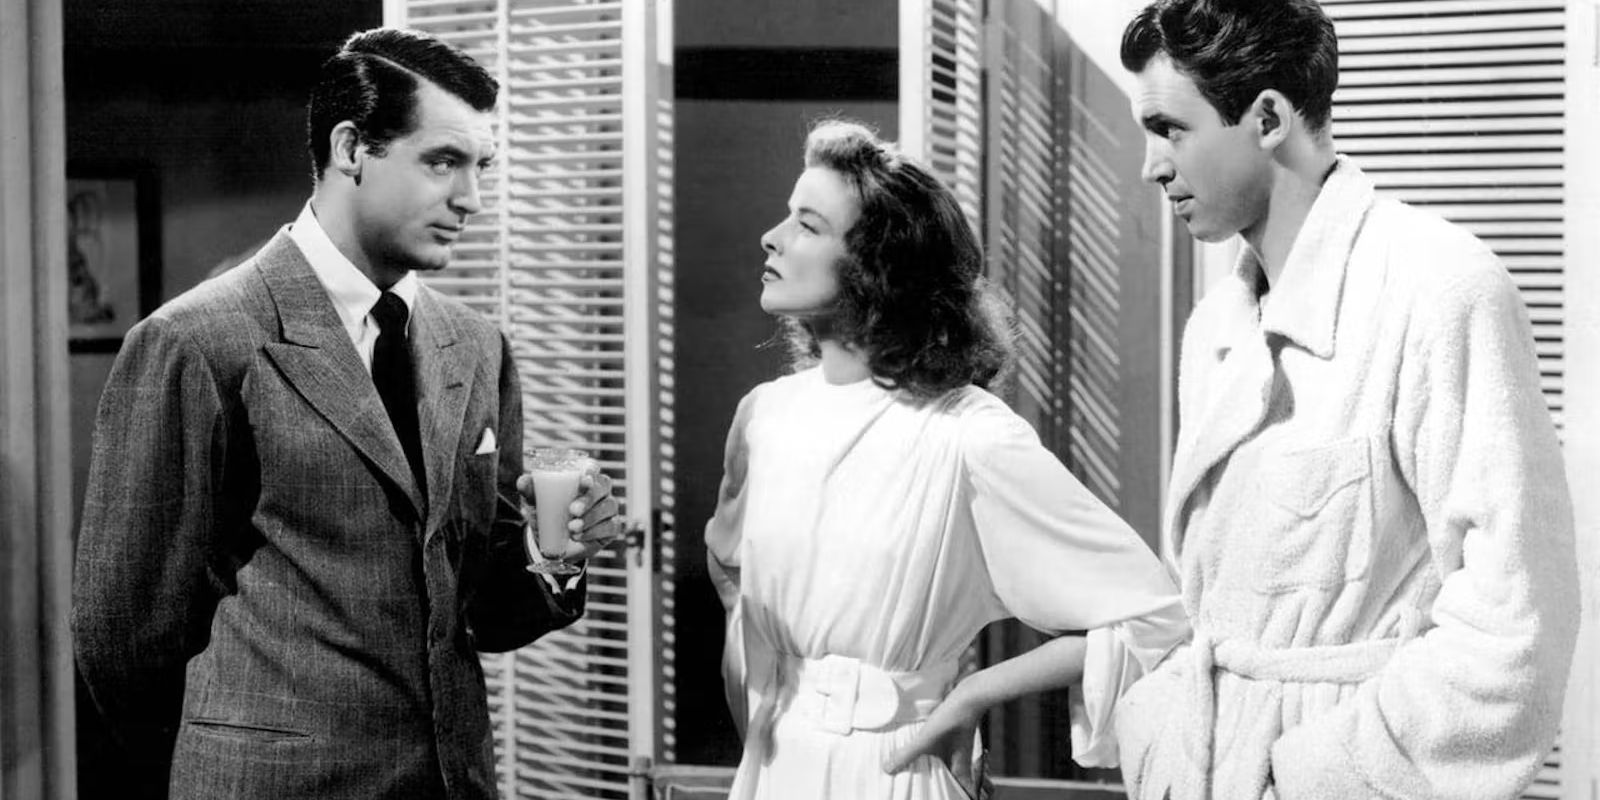 Dexter, Tracy and Mike talking in The Philadelphia Story.